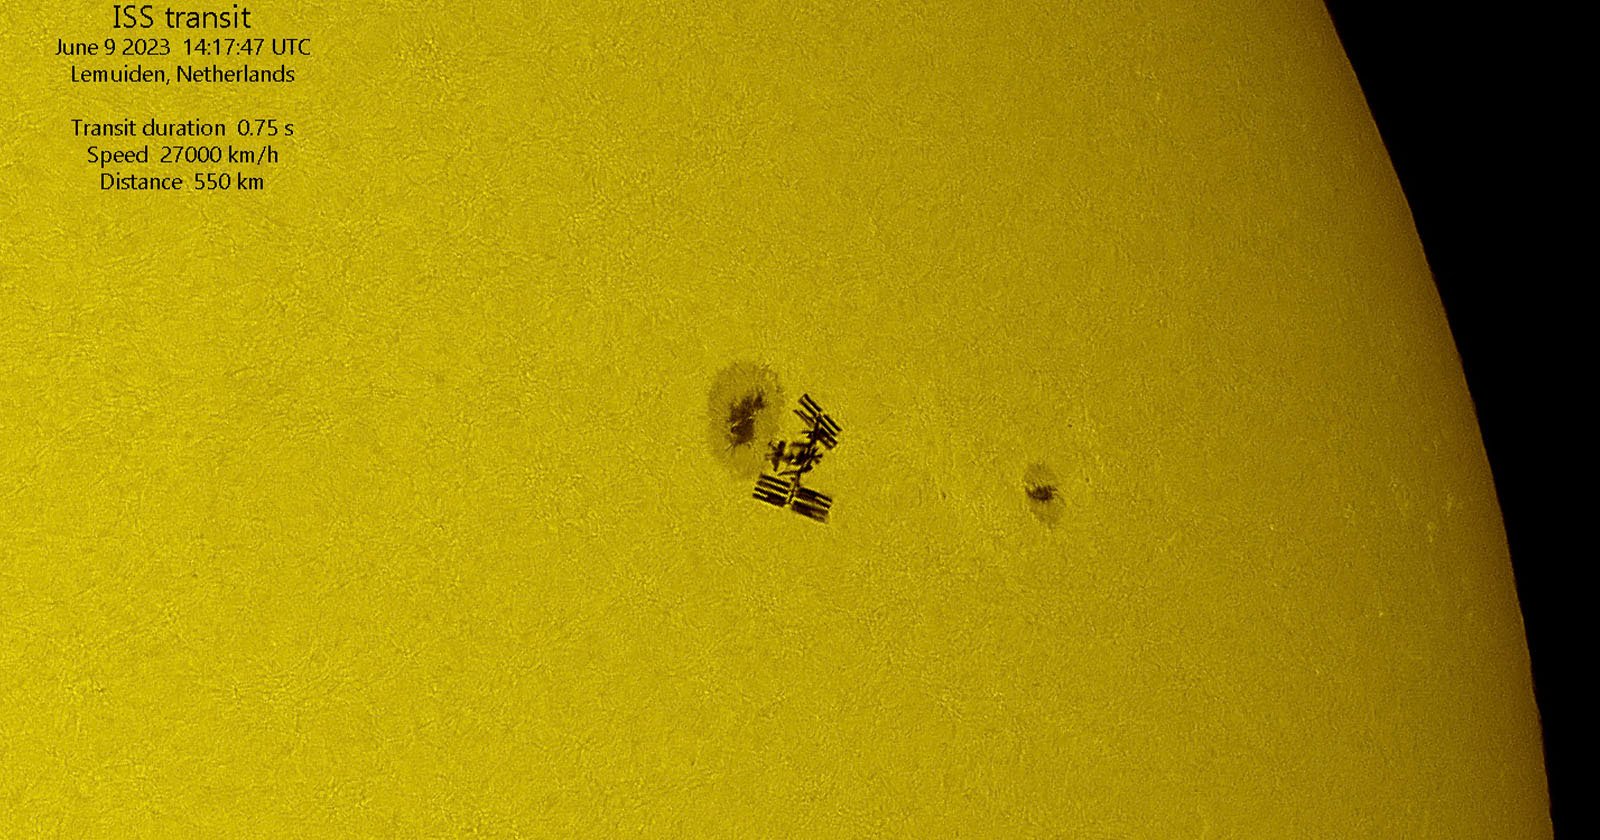  photographer captures iss crossing sun during astronaut 